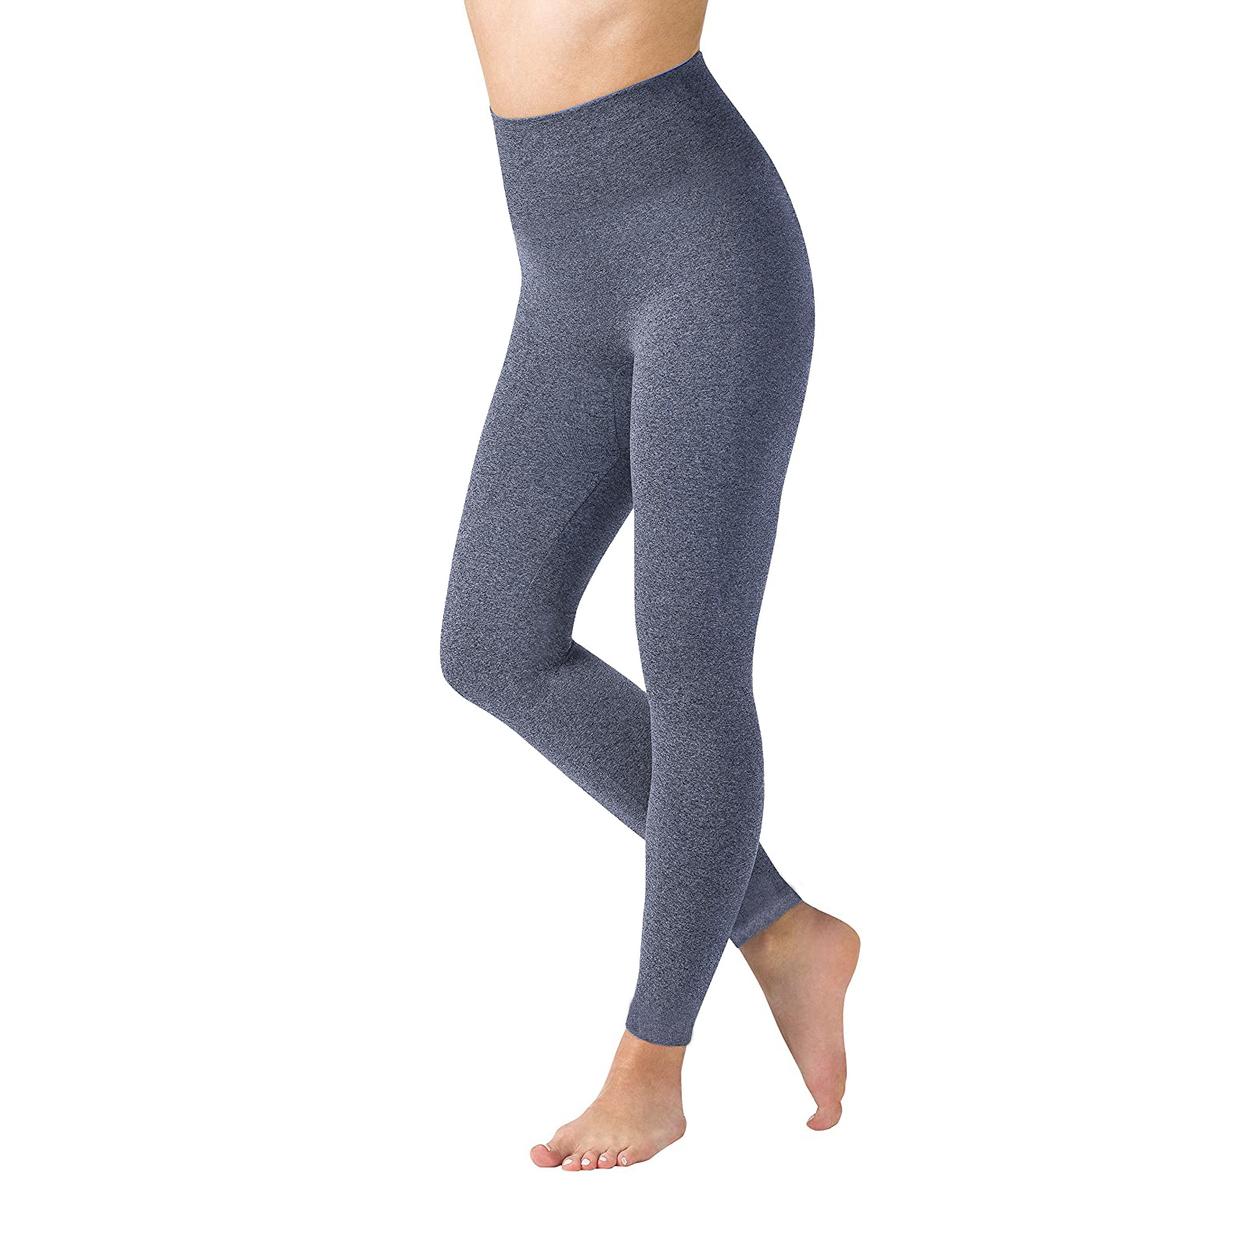 Multi-Pack: Women's High Waisted Ultra-Soft Fleece Lined Warm Marled Leggings(Available In Plus Sizes) - 2-pack, Navy & Navy, Large